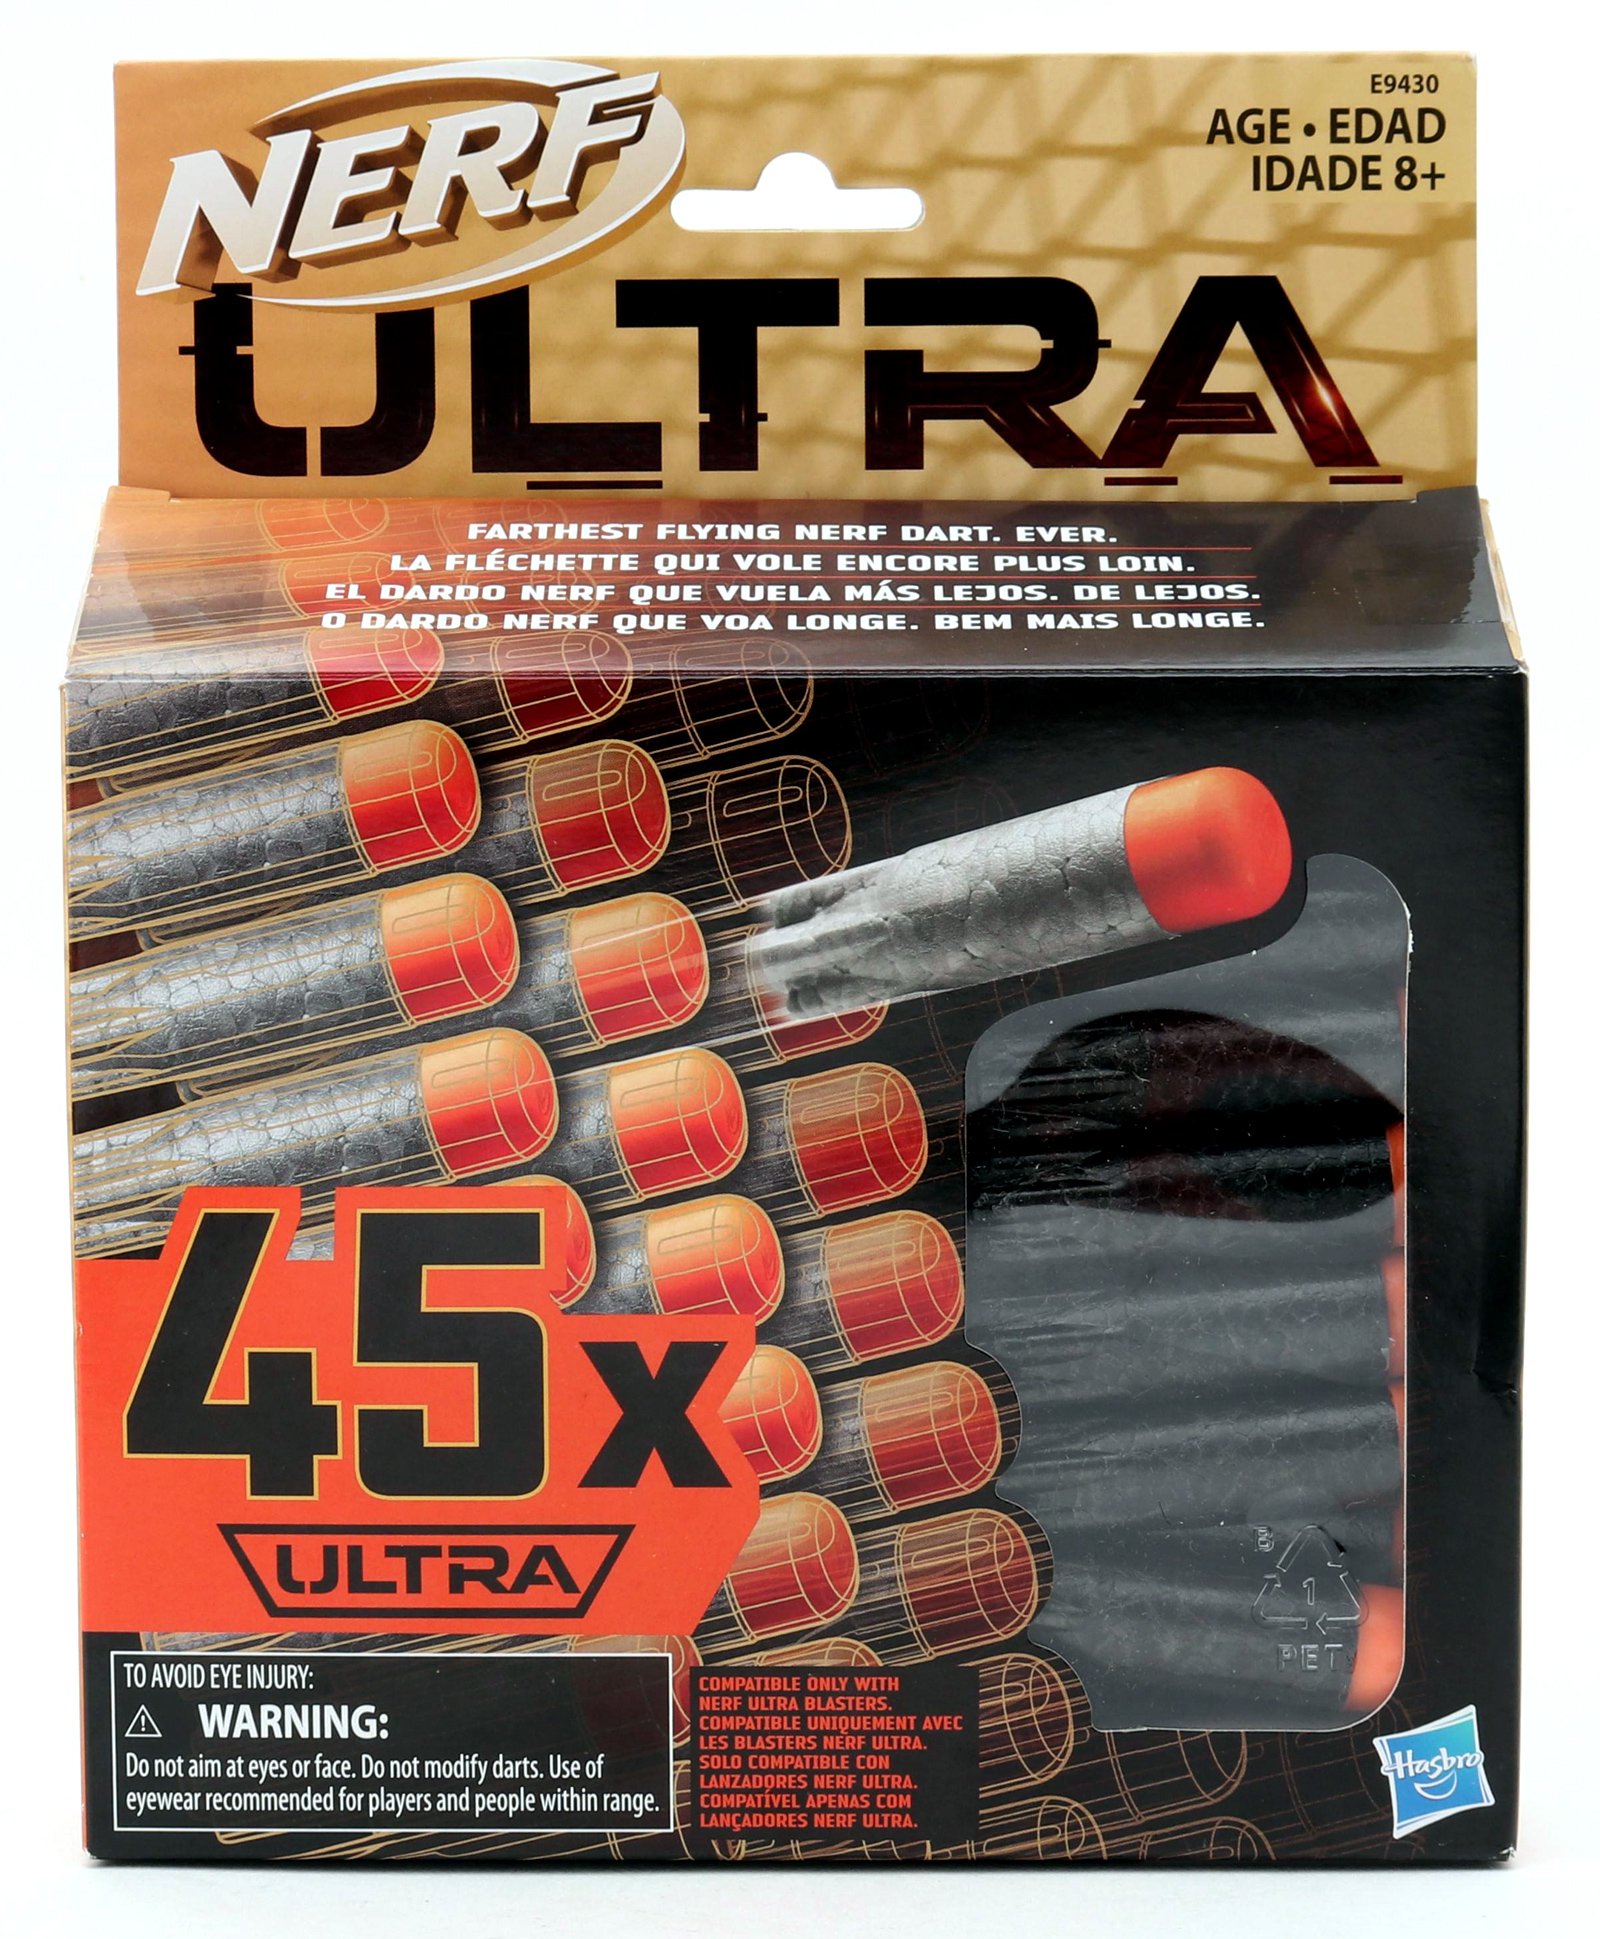 2x NERF Ultra 20 Dart Refill the Farthest Flying Darts Ever for sale online